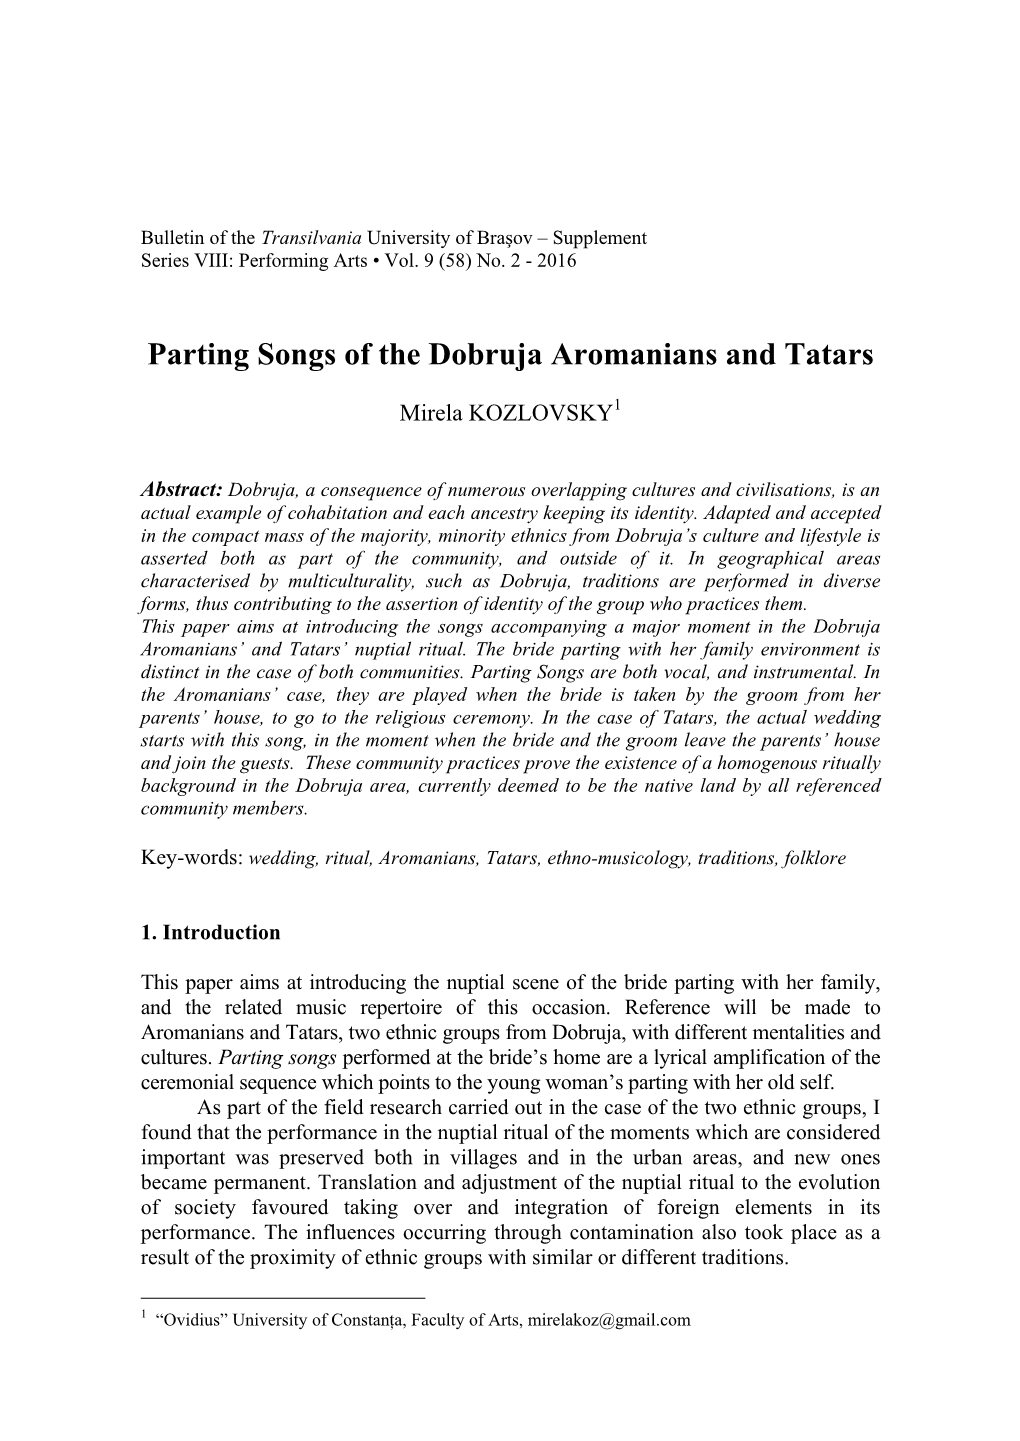 Kozlovsky, M.: Parting Songs of the Dobruja Aromanians and Tatars